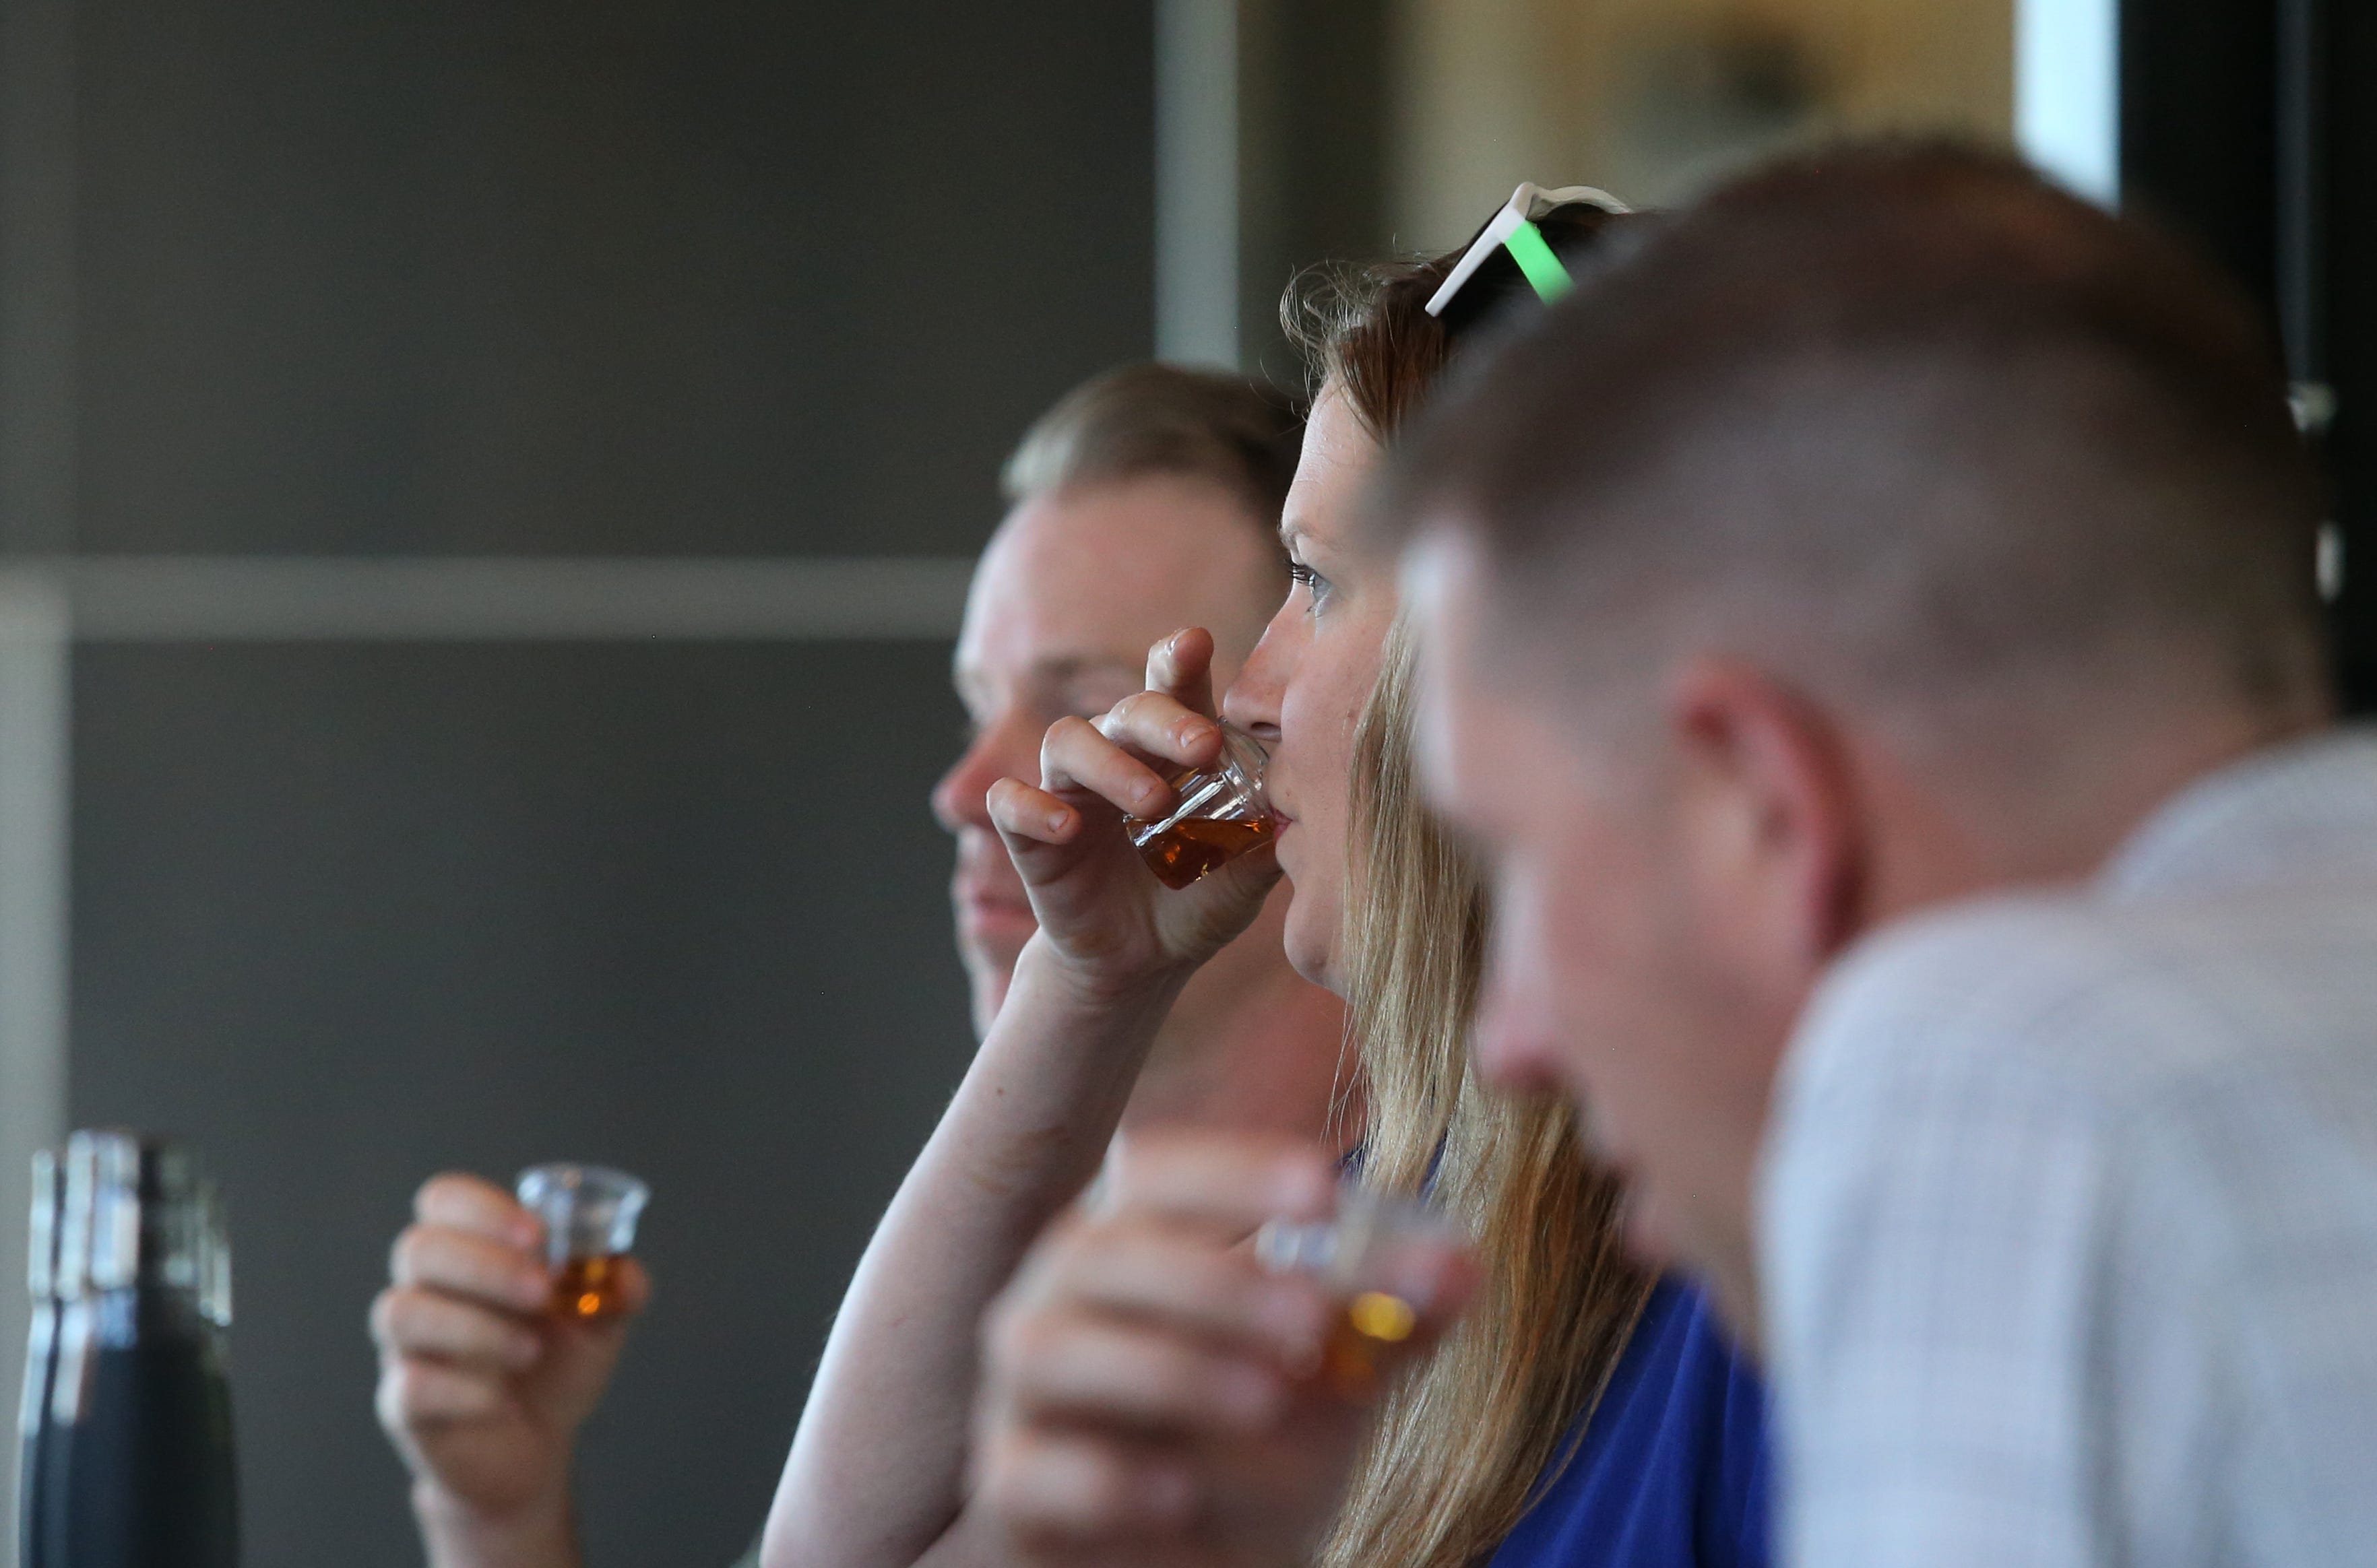 Maggie Menderski, center, Chris L’Heureux, right, and Mike Day take drinks of bourbon at the end of the tour of New Riff Distillery in Newport, Kentucky.June 30, 2022